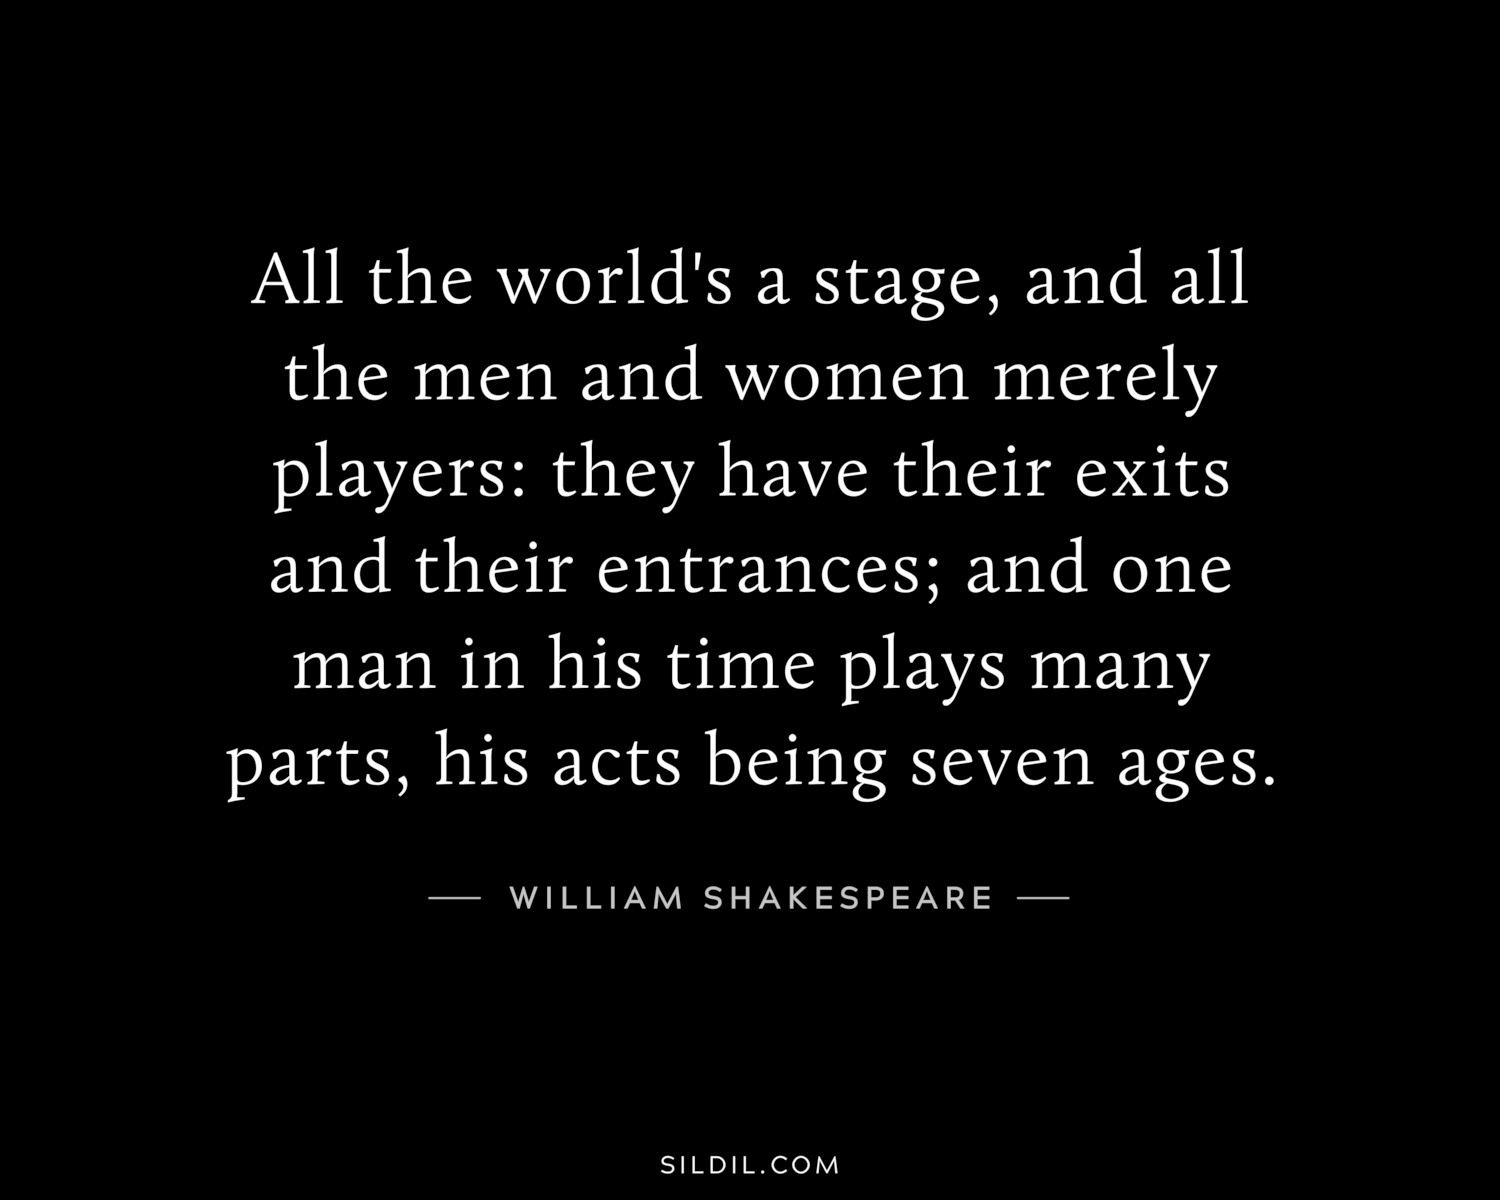 All the world's a stage, and all the men and women merely players: they have their exits and their entrances; and one man in his time plays many parts, his acts being seven ages.